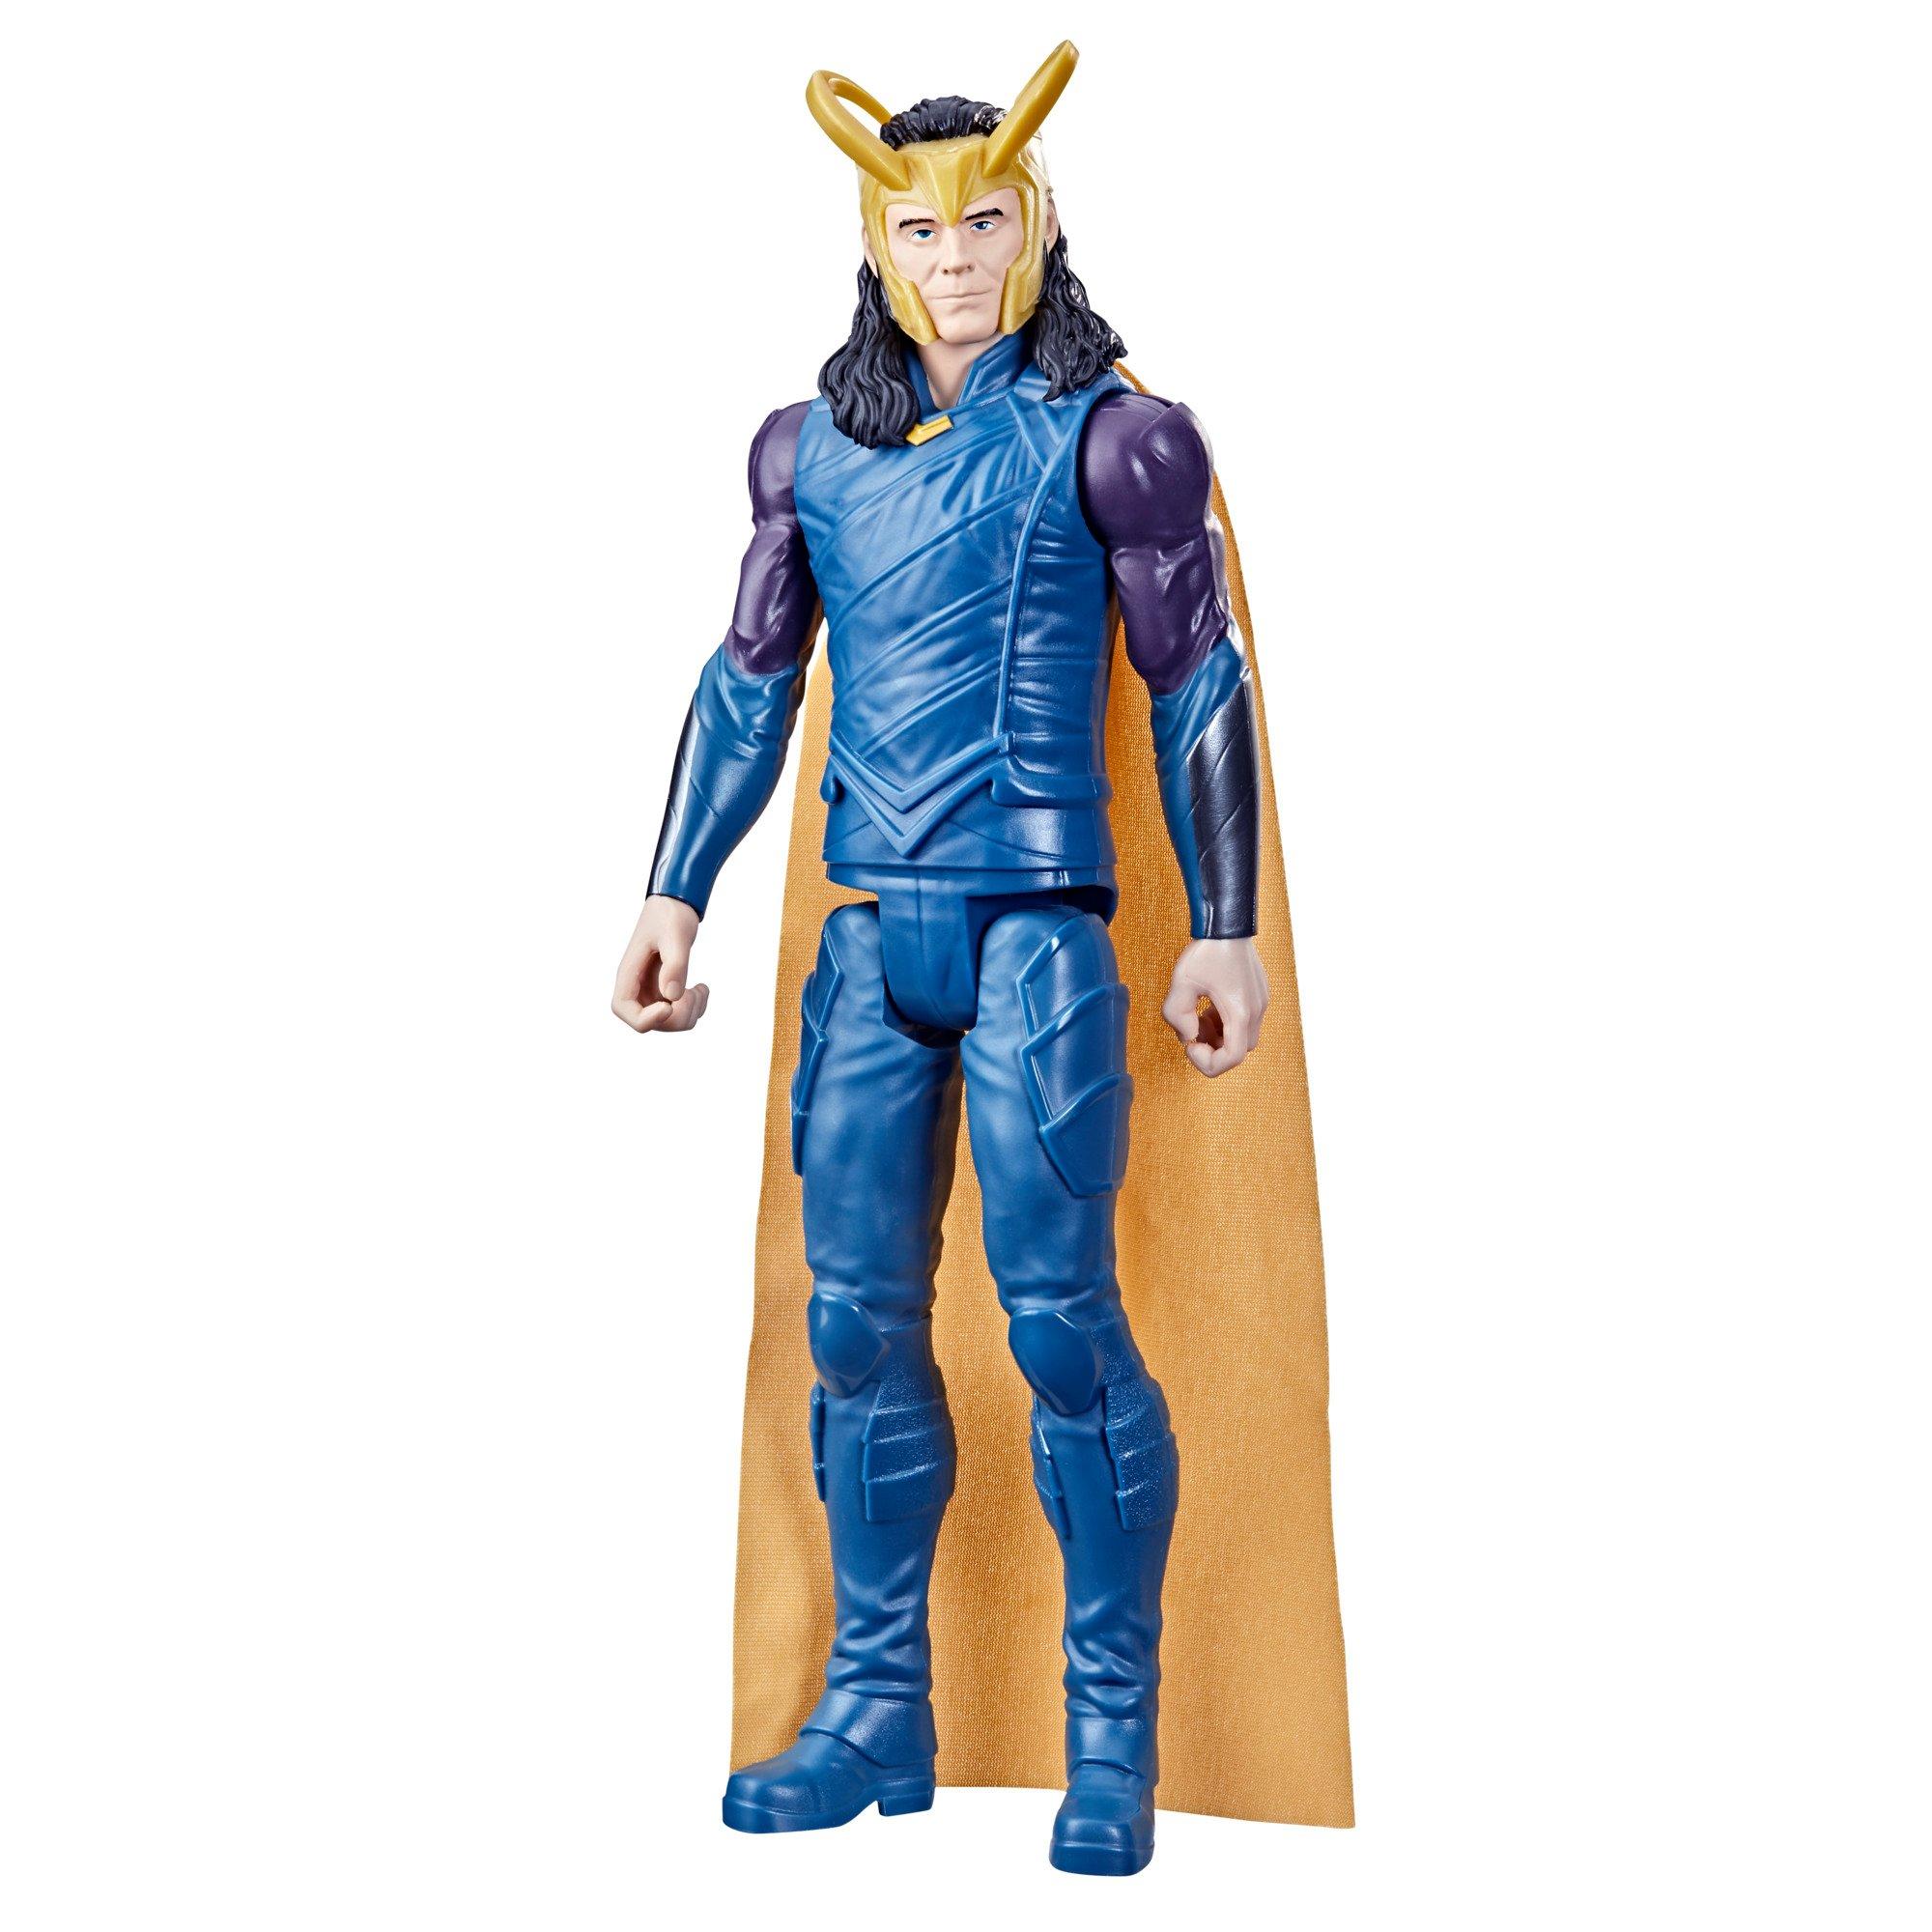 12" Marvel The Avengers Titan Hero Series Action Figure THOR Kids Collection Toy 